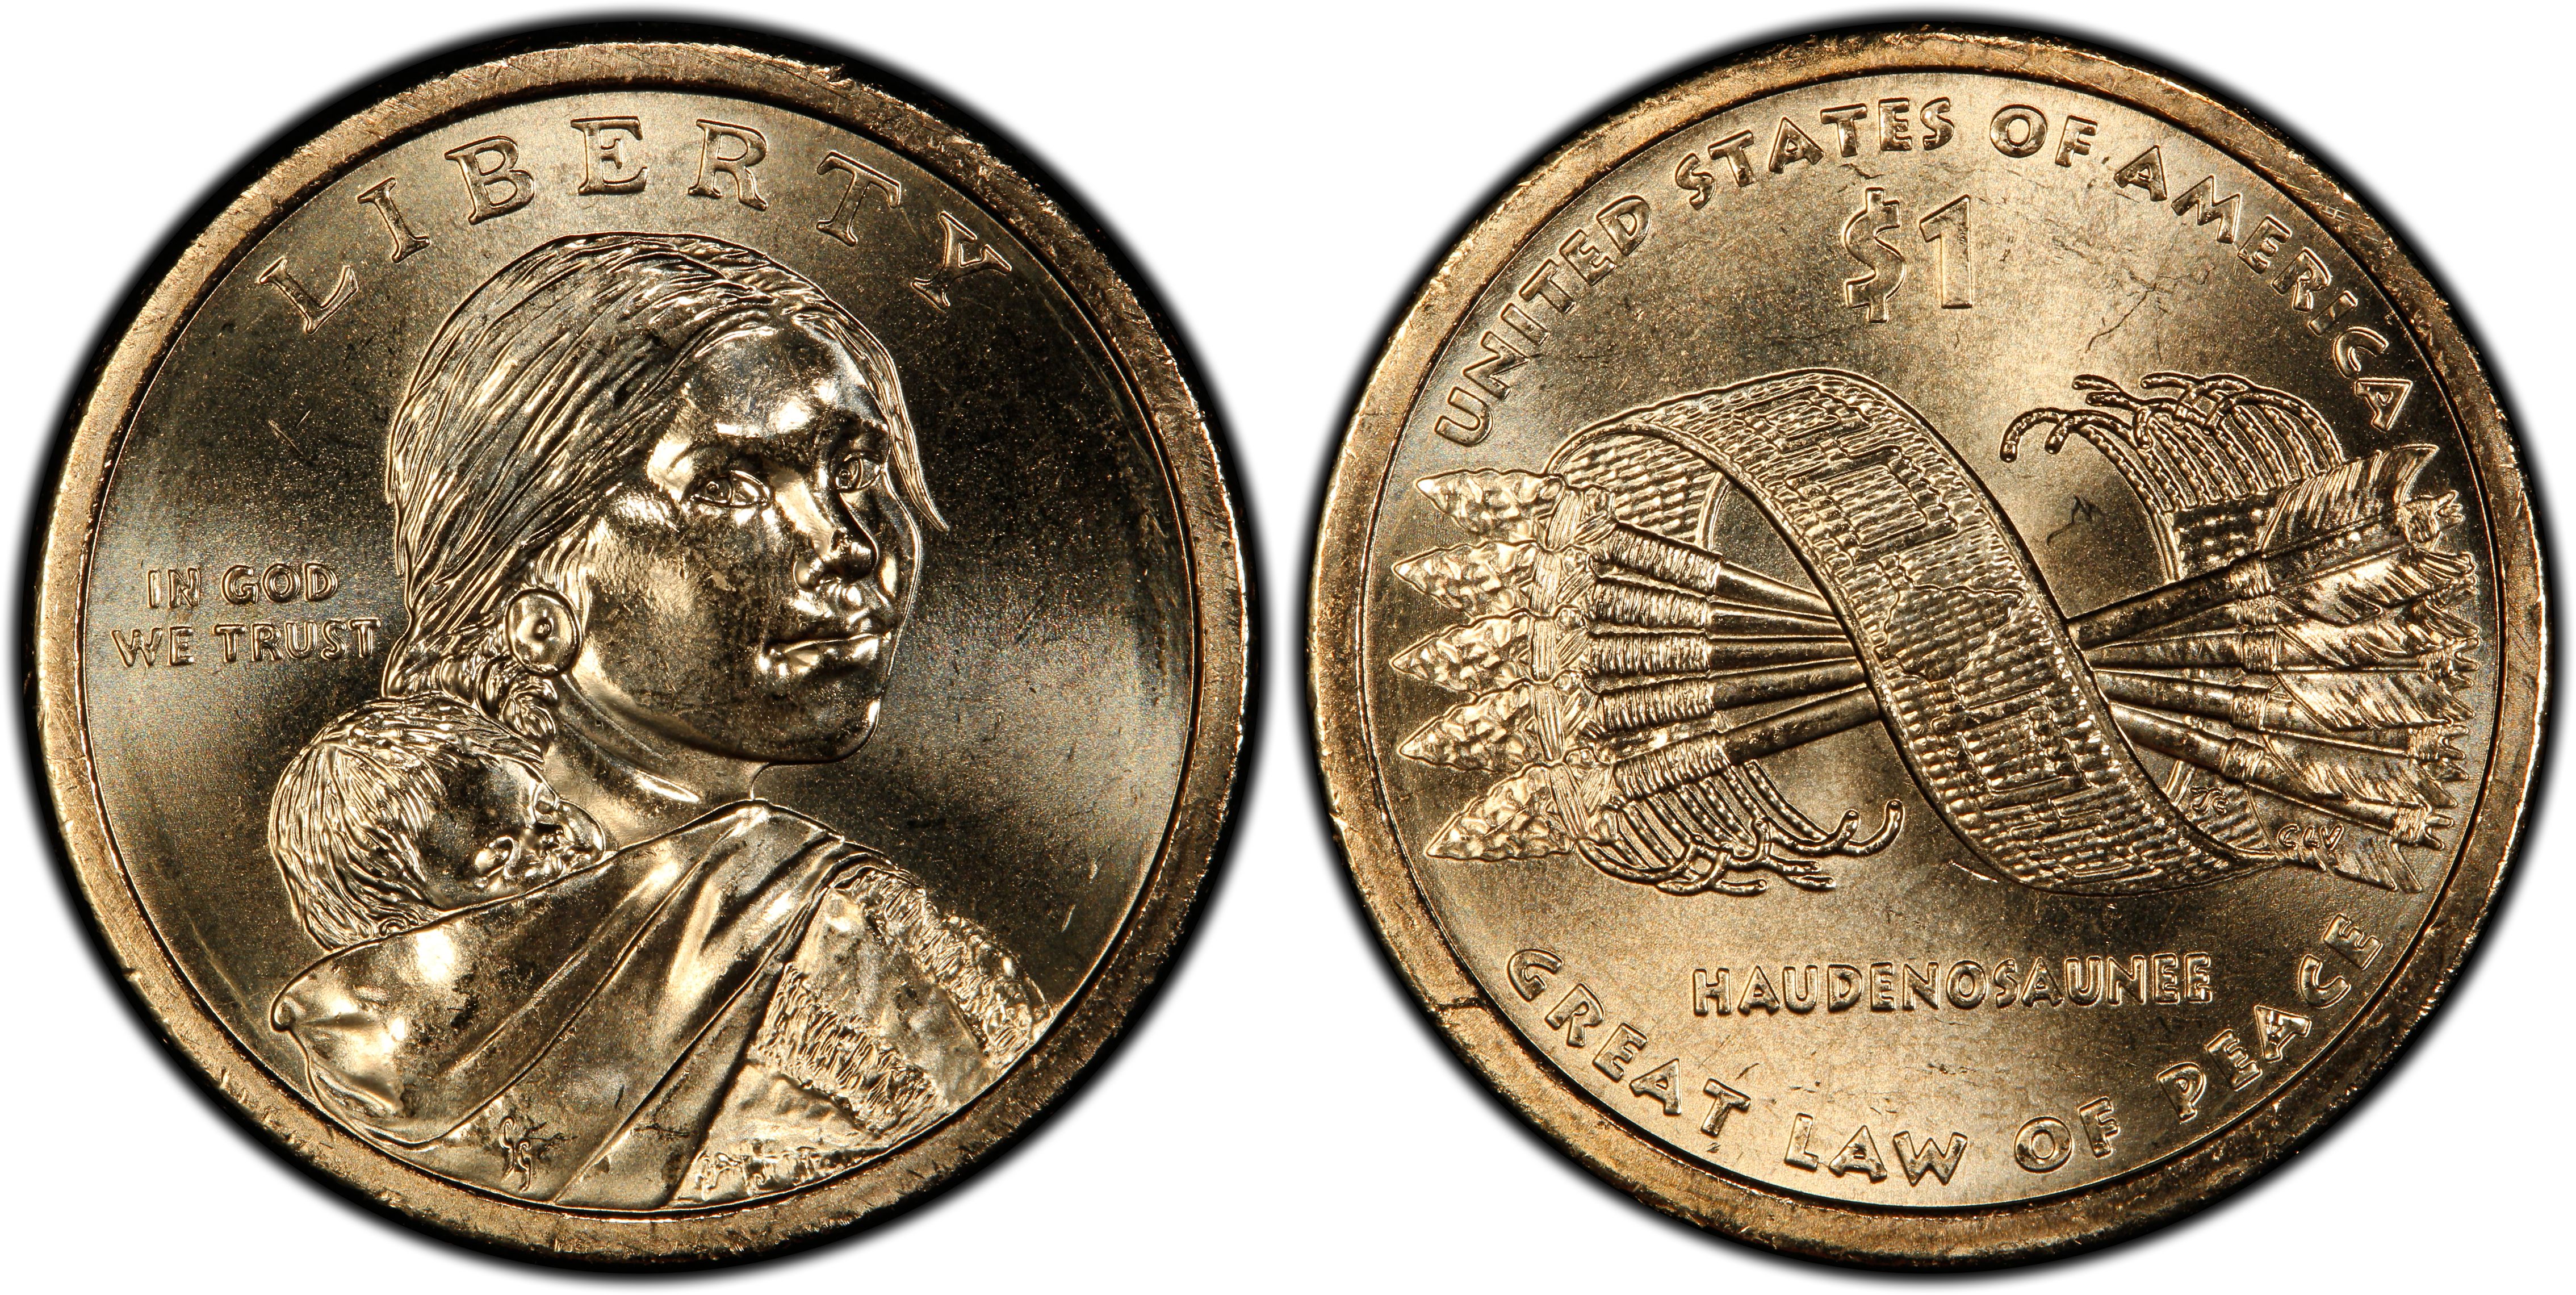 Details about  / 2010 S Proof Native American Dollar